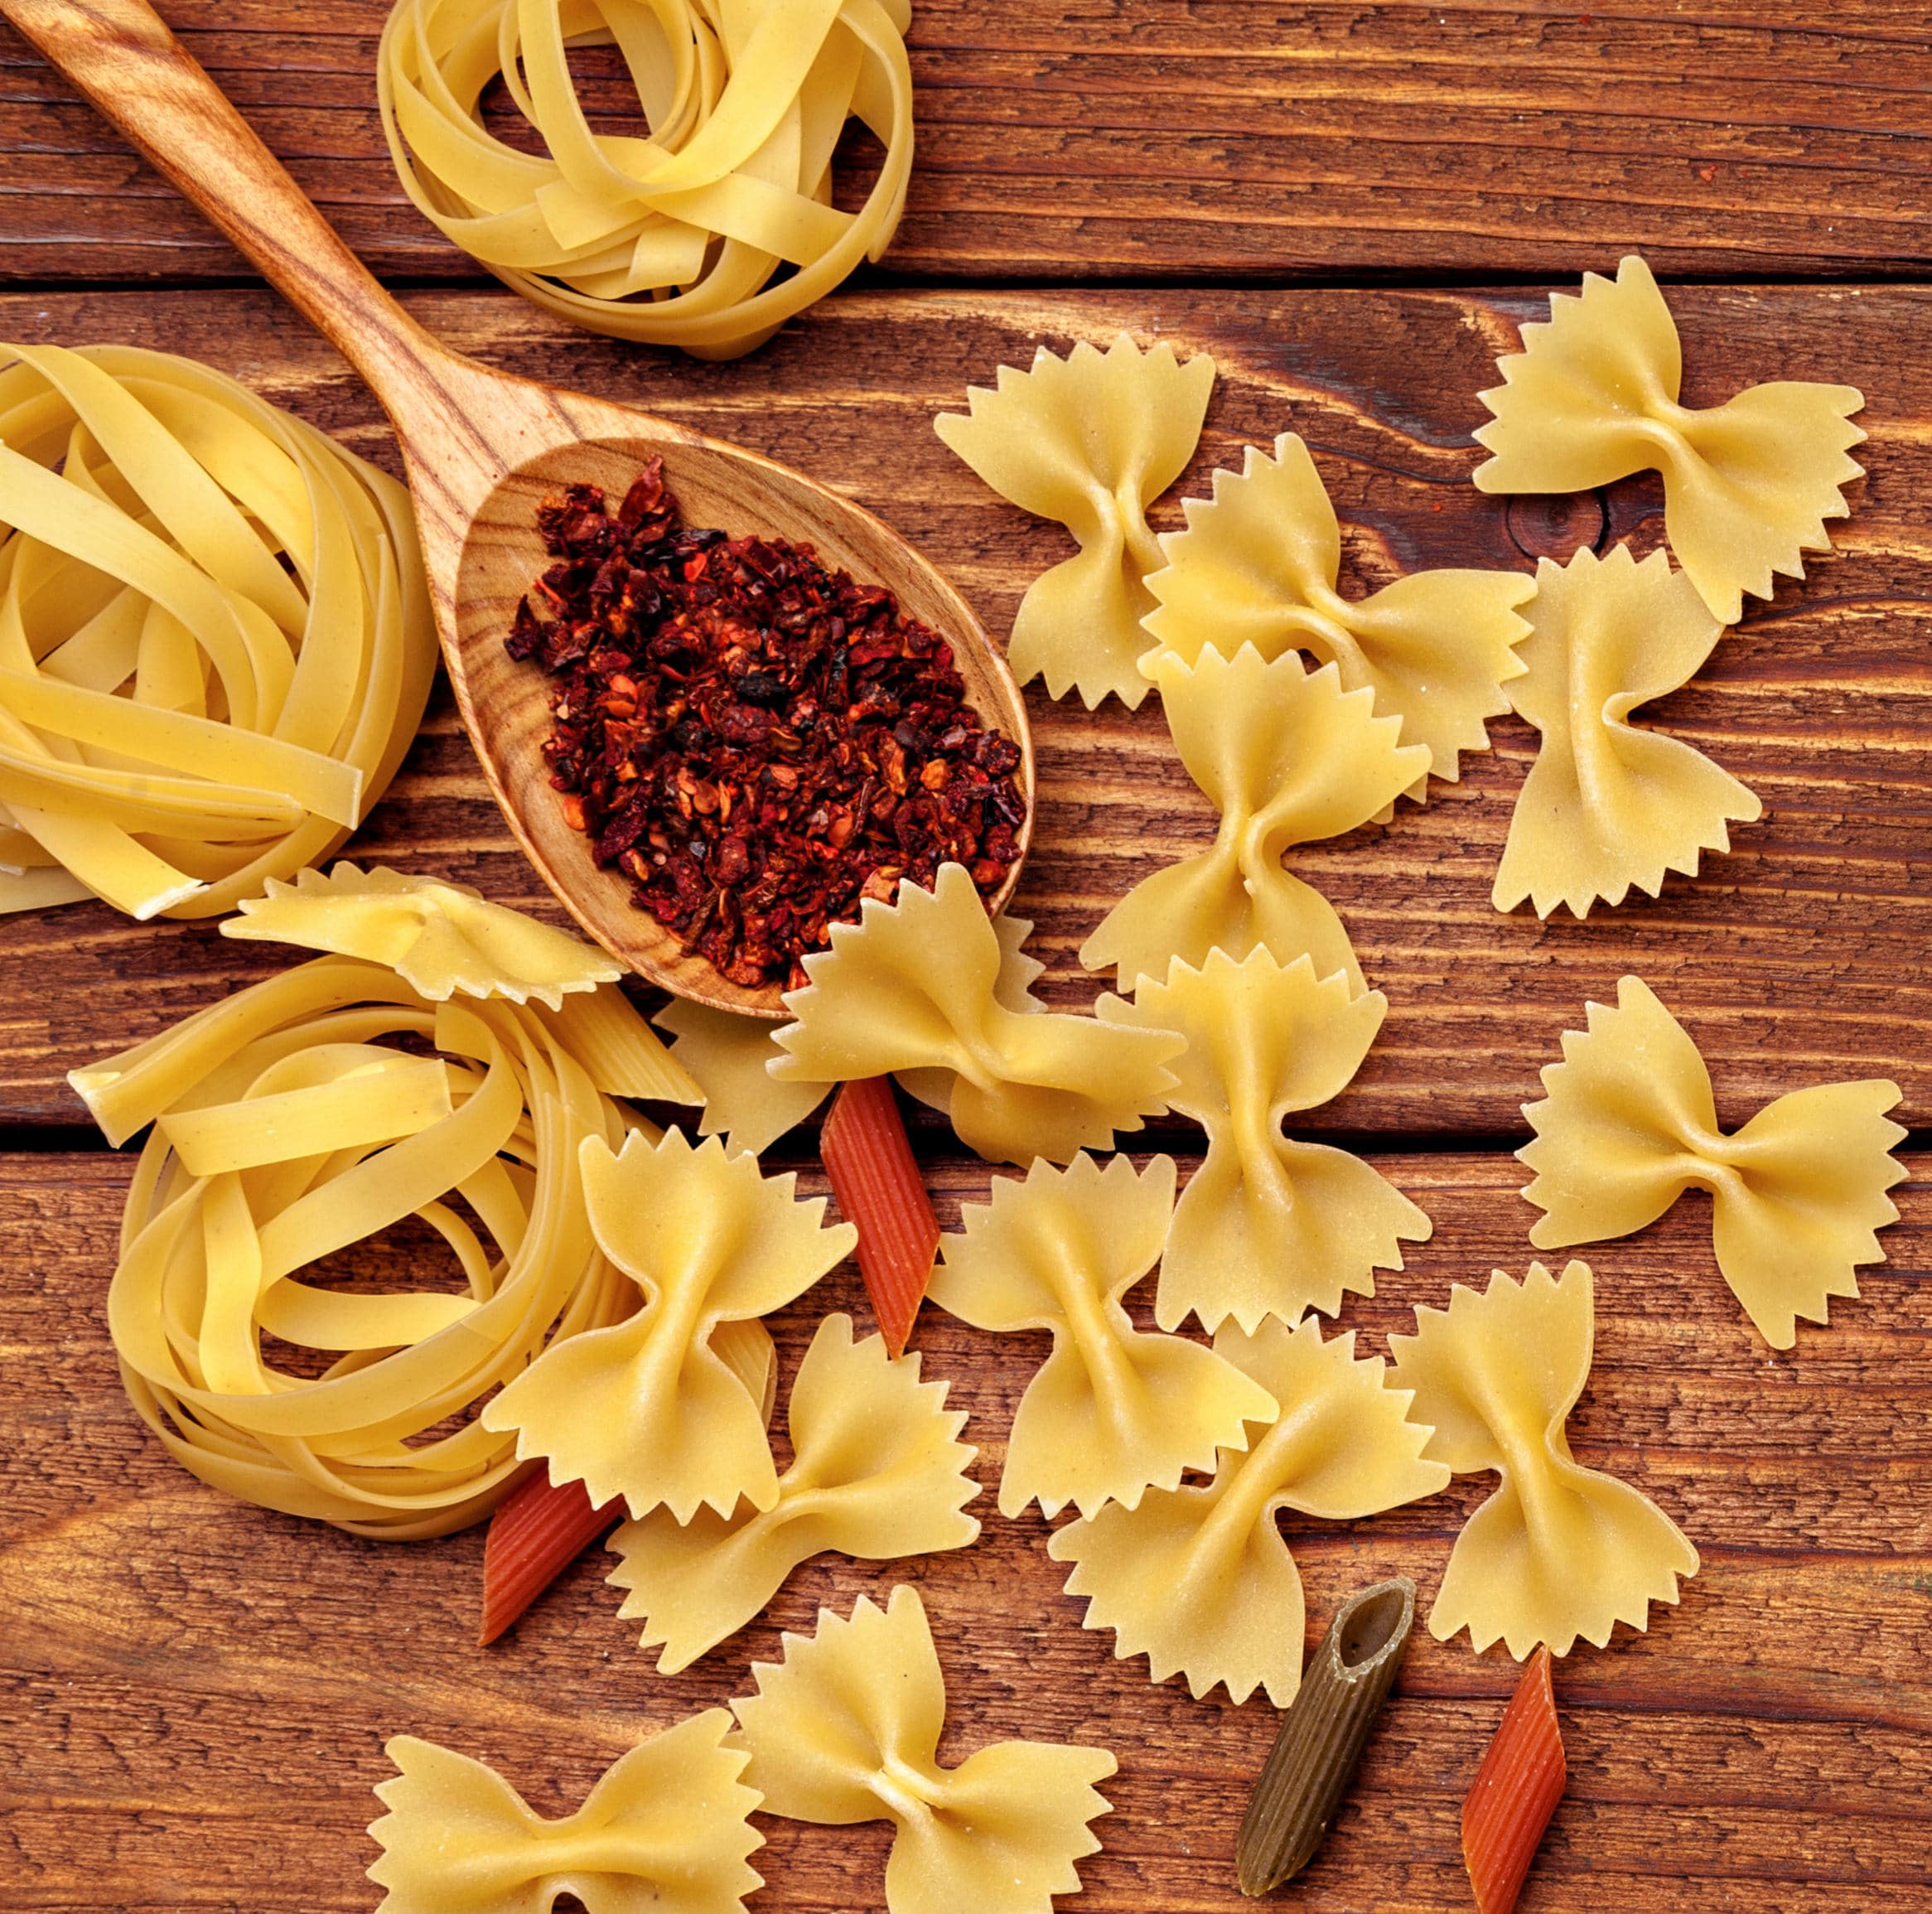 Homemade Pasta Shapes You Can Make Without A Machine - Cook Gem